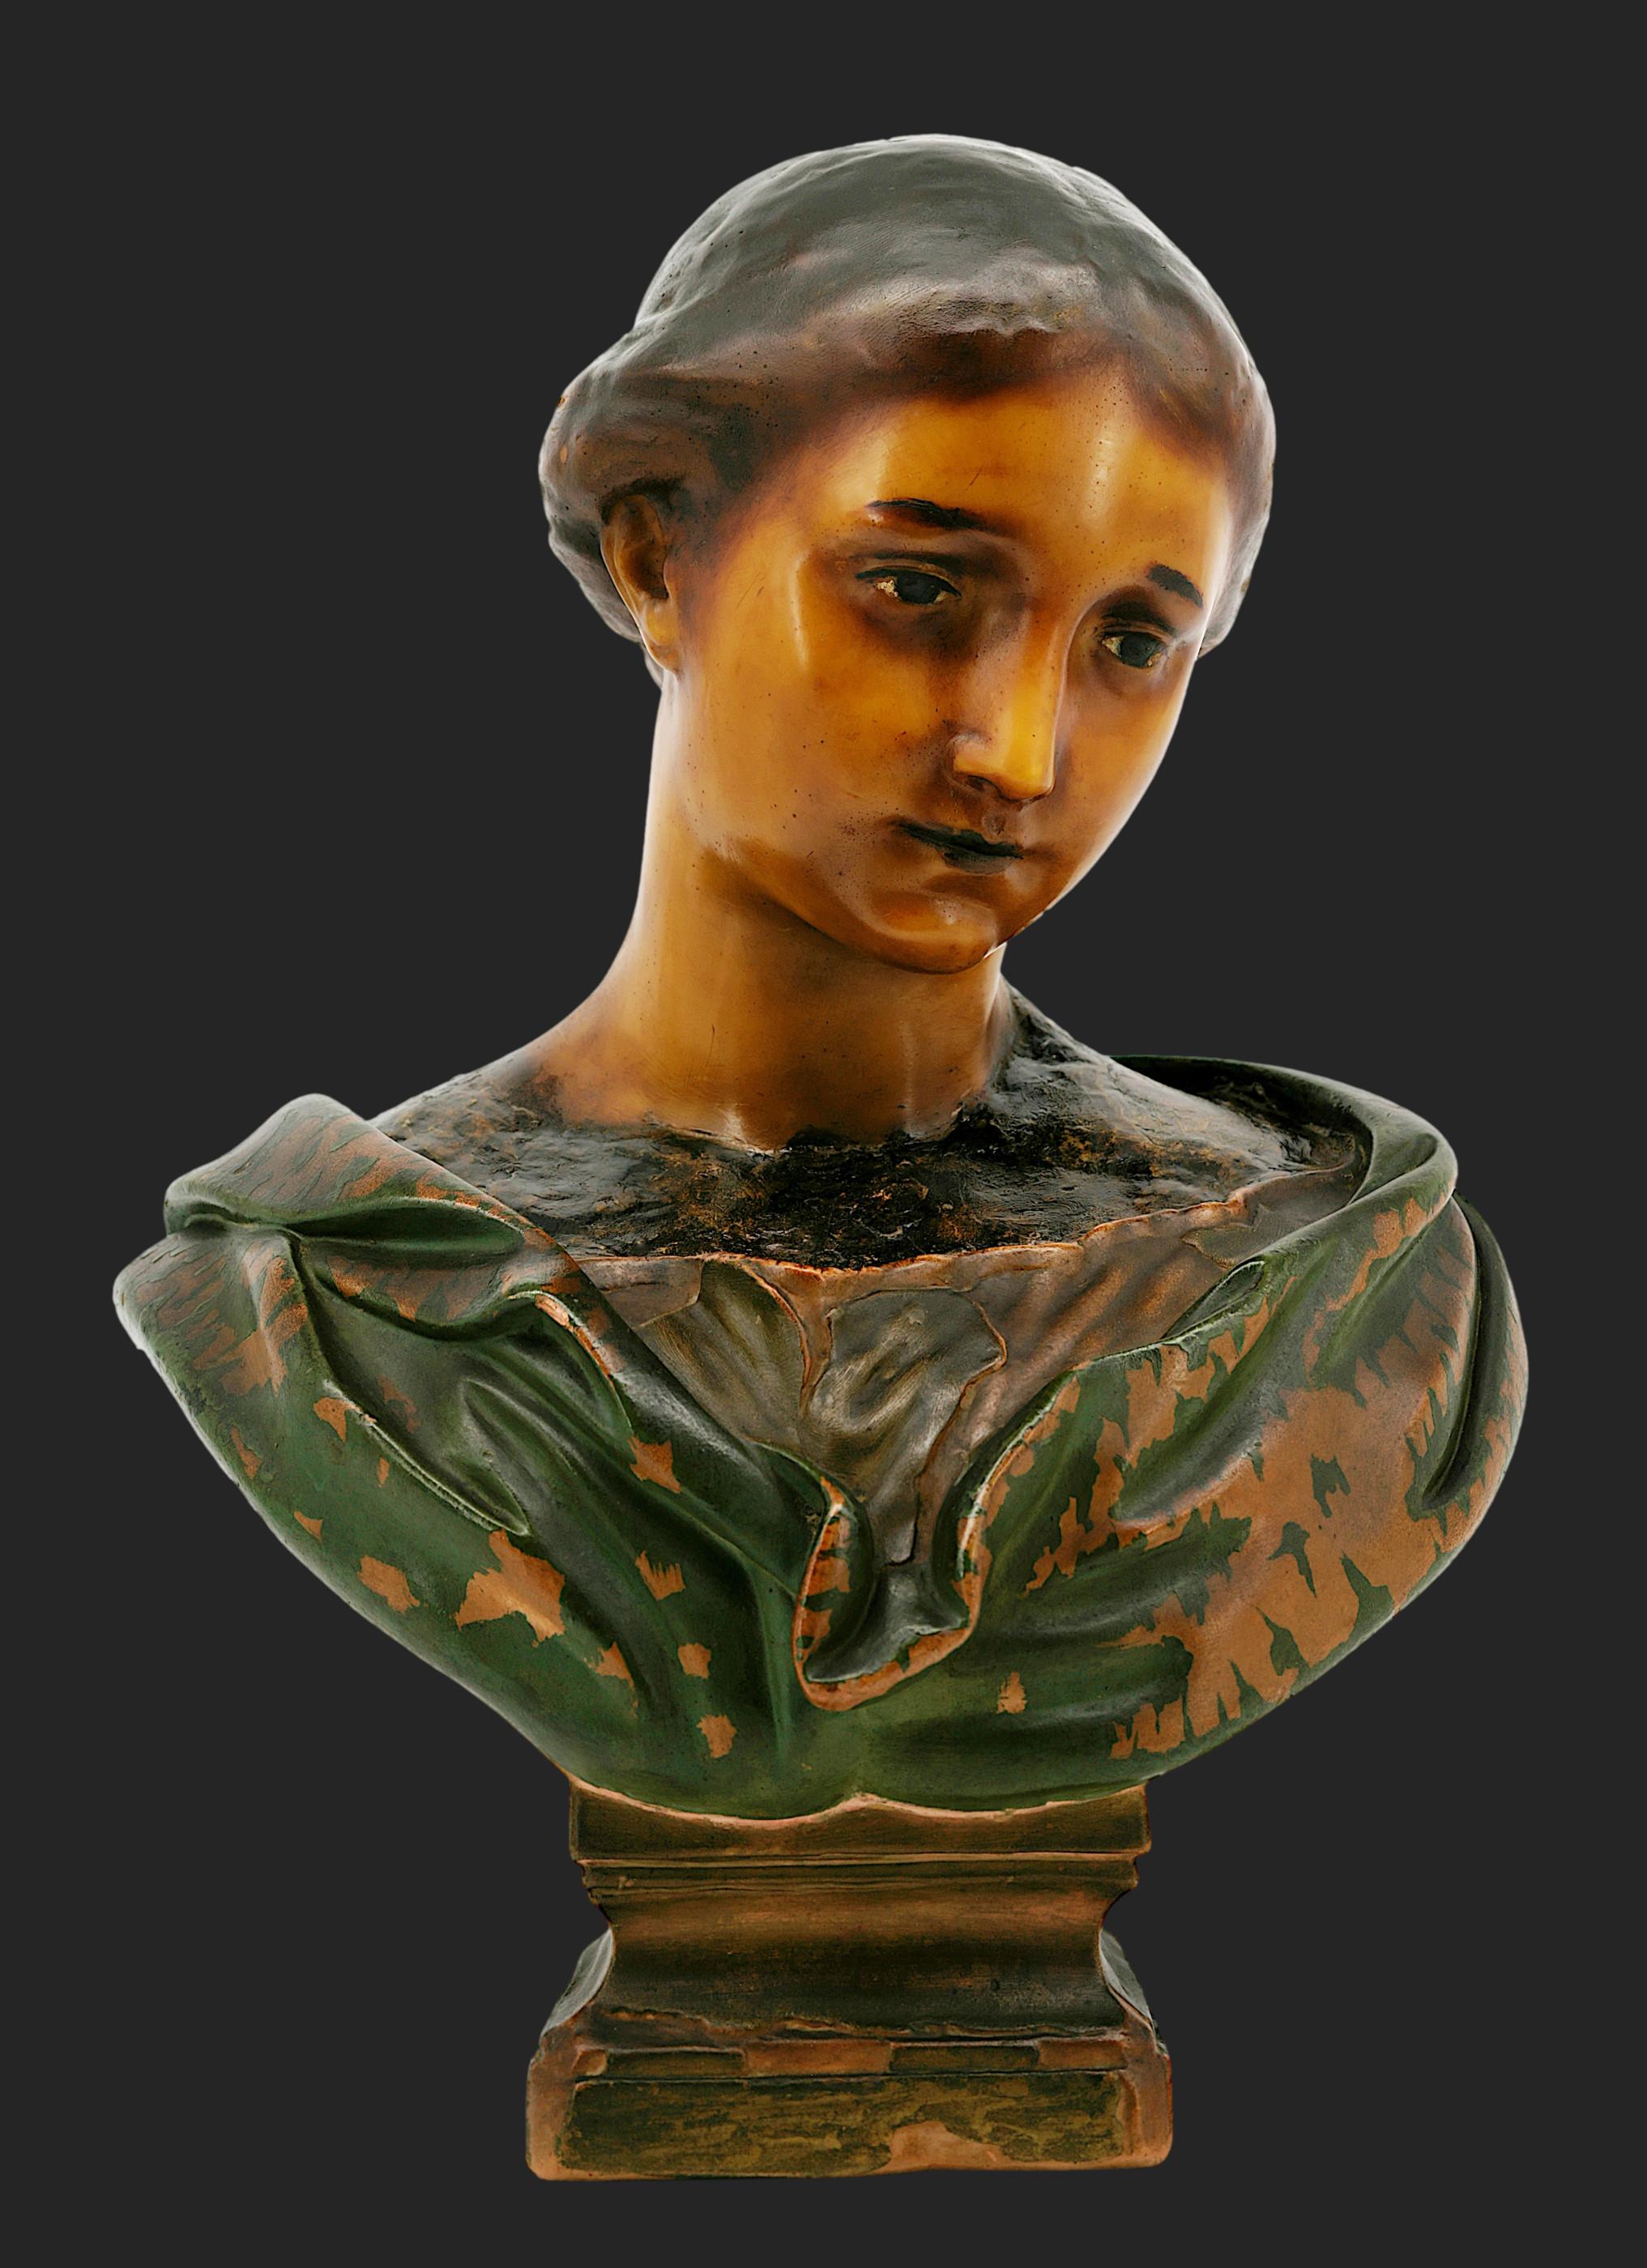 Wax young girl  bust sculpture by Mme Arondelle, 2 rue du Louvre, Paris, France, ca.1900. Polychrome wax. After the famous Wax Head from the Lille museum (France). Height : 17.9